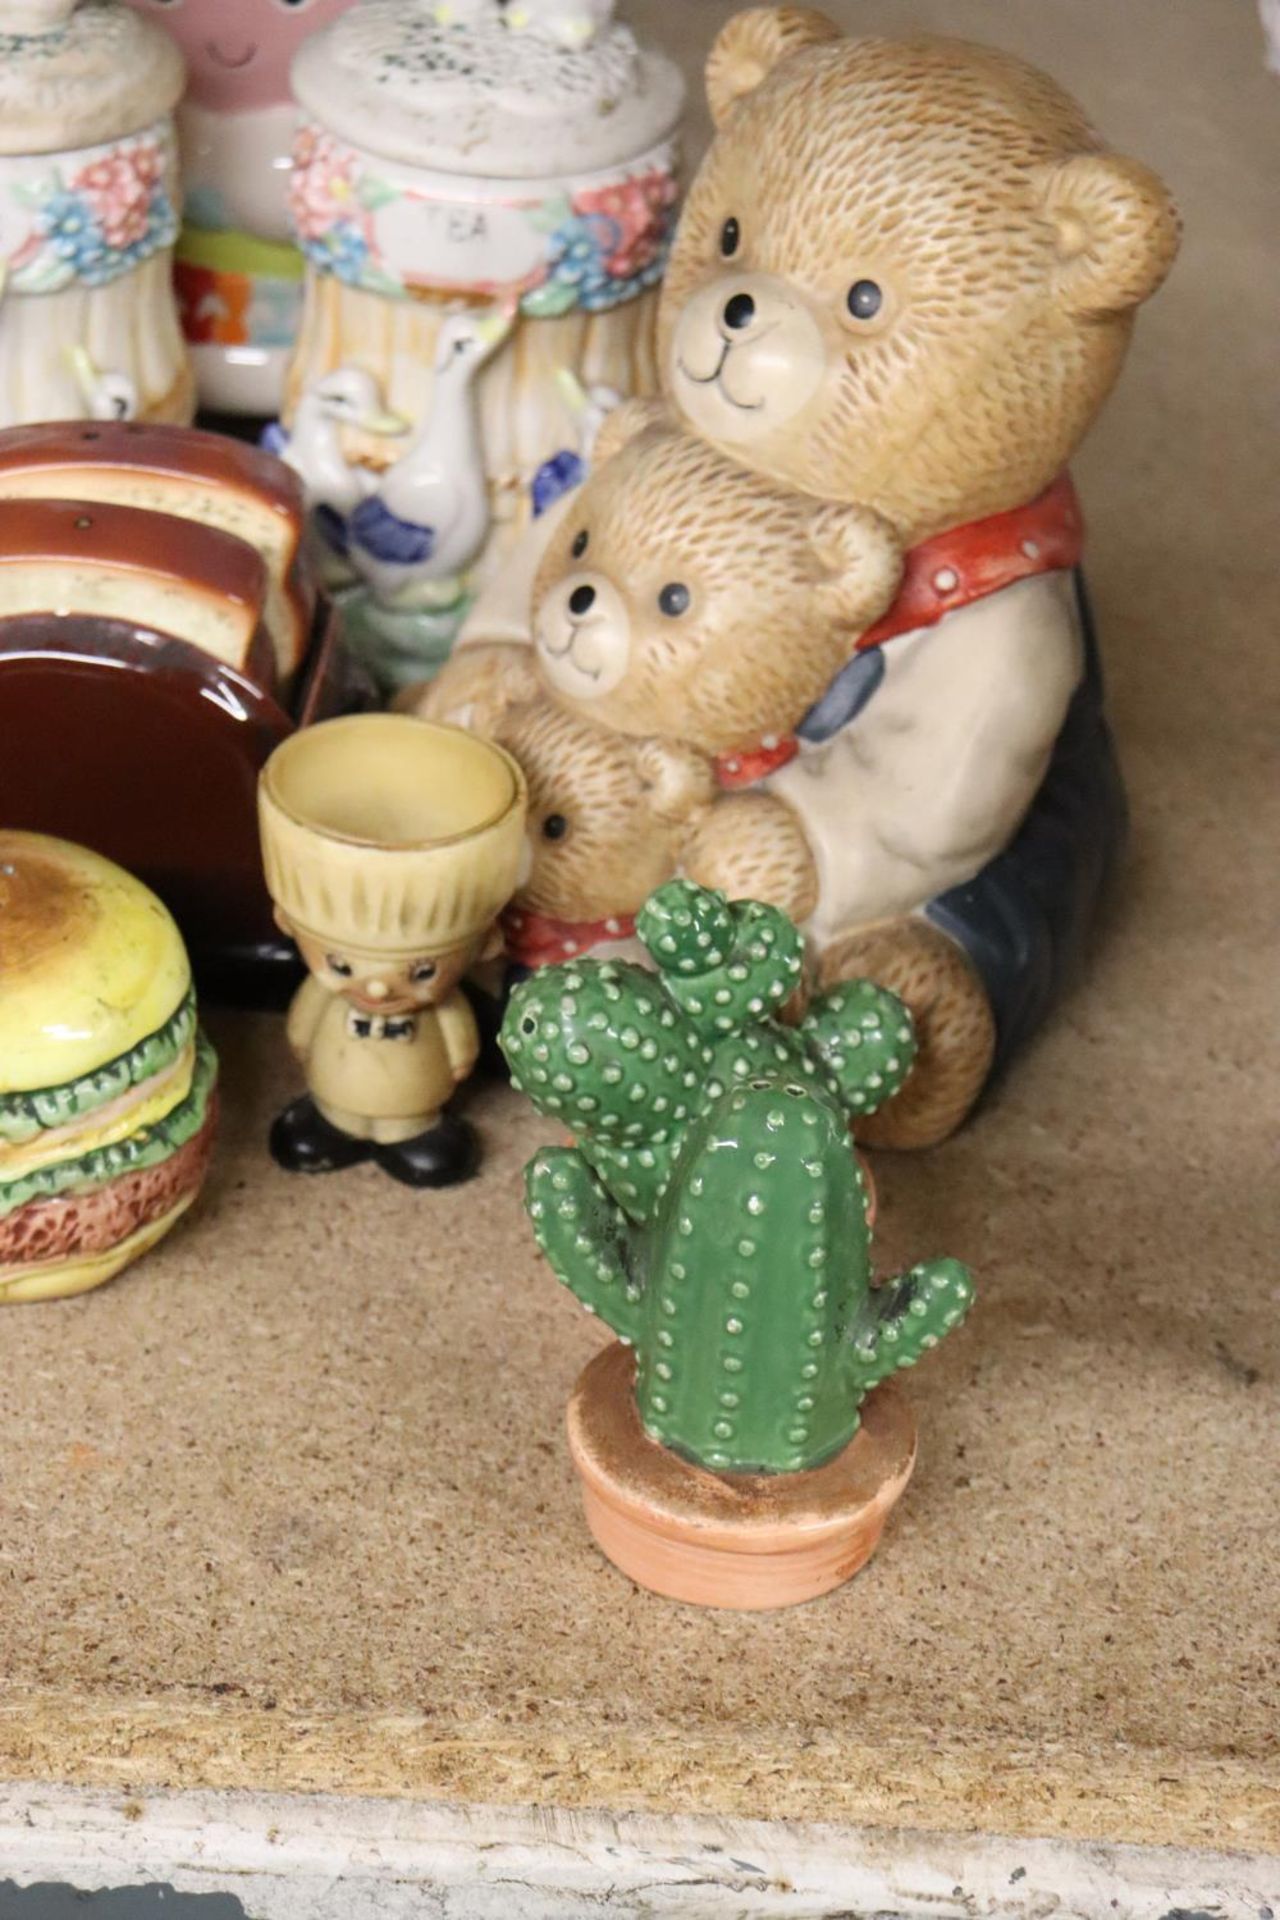 A COLLECTION OF NOVELTY CRUET SETS AND STORAGE JARS - Image 5 of 5